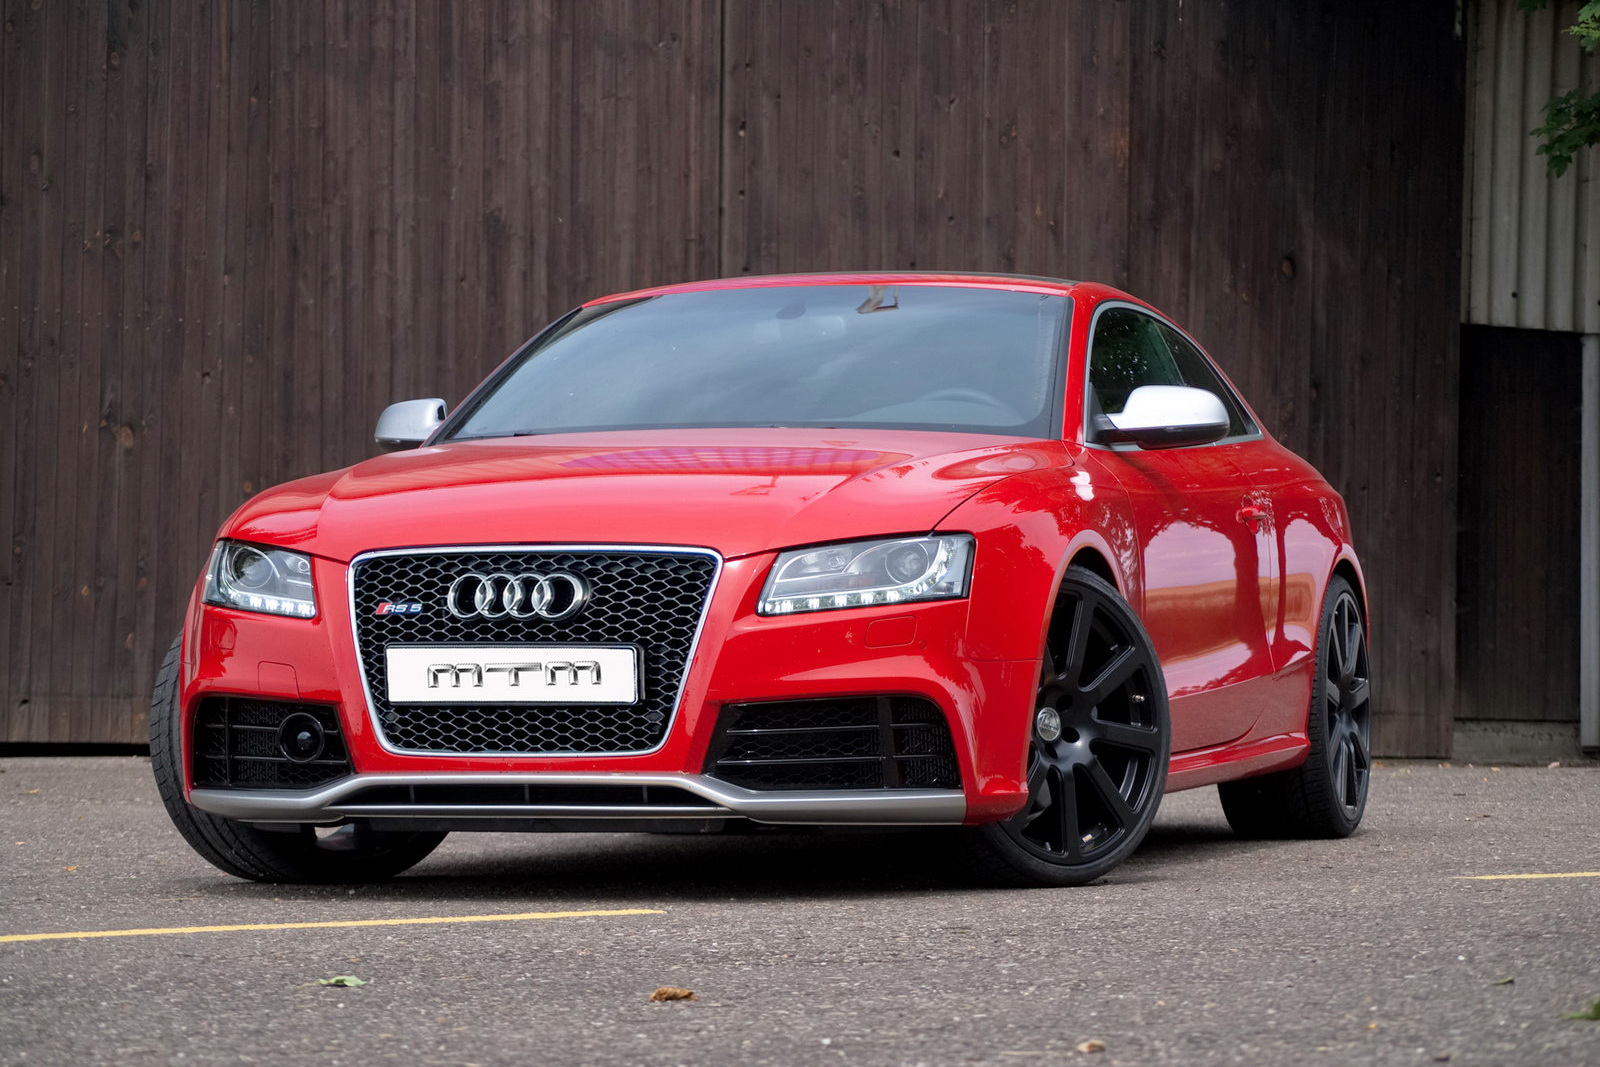 leder Hovedløse Examen album MTM Massages the Audi RS5, Top Speed Increased to 303km/h (188mph) |  Carscoops